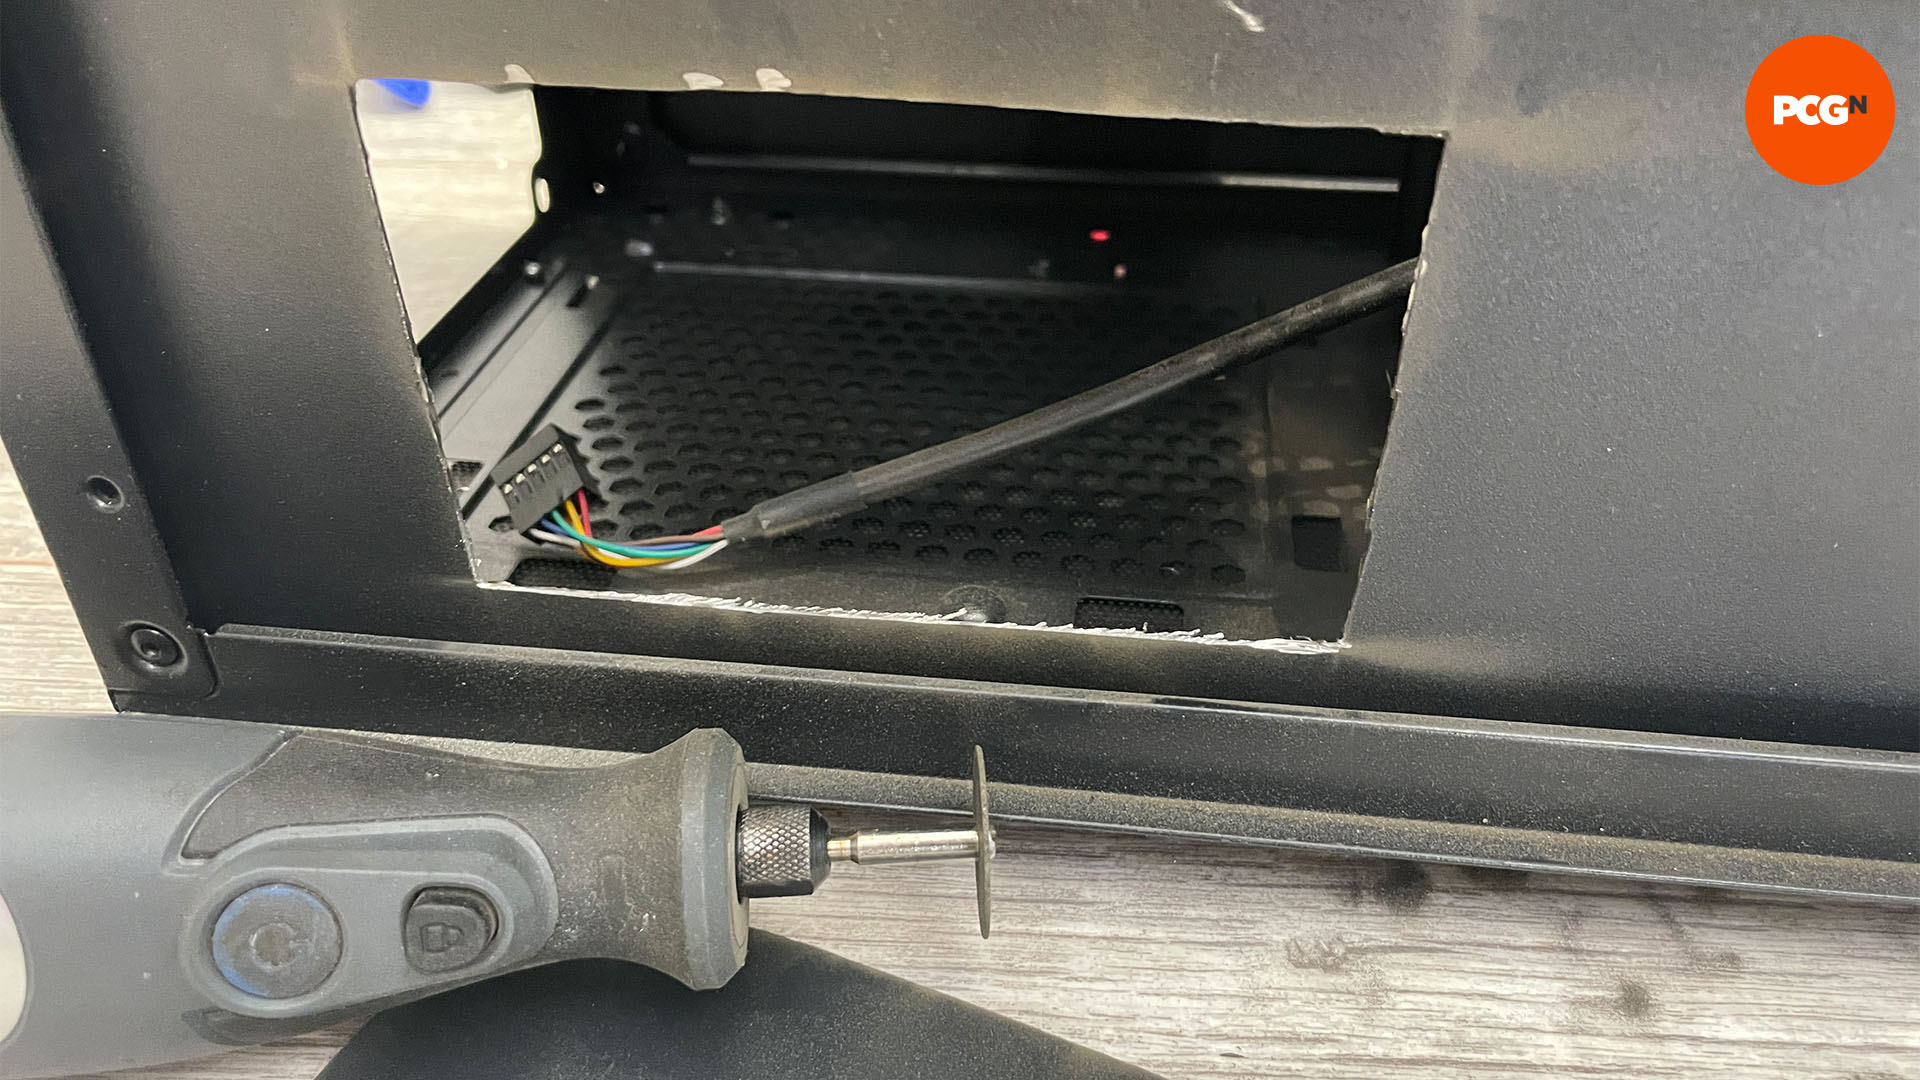 How to fit a screen in your PC case: Dremel PSU cover hole